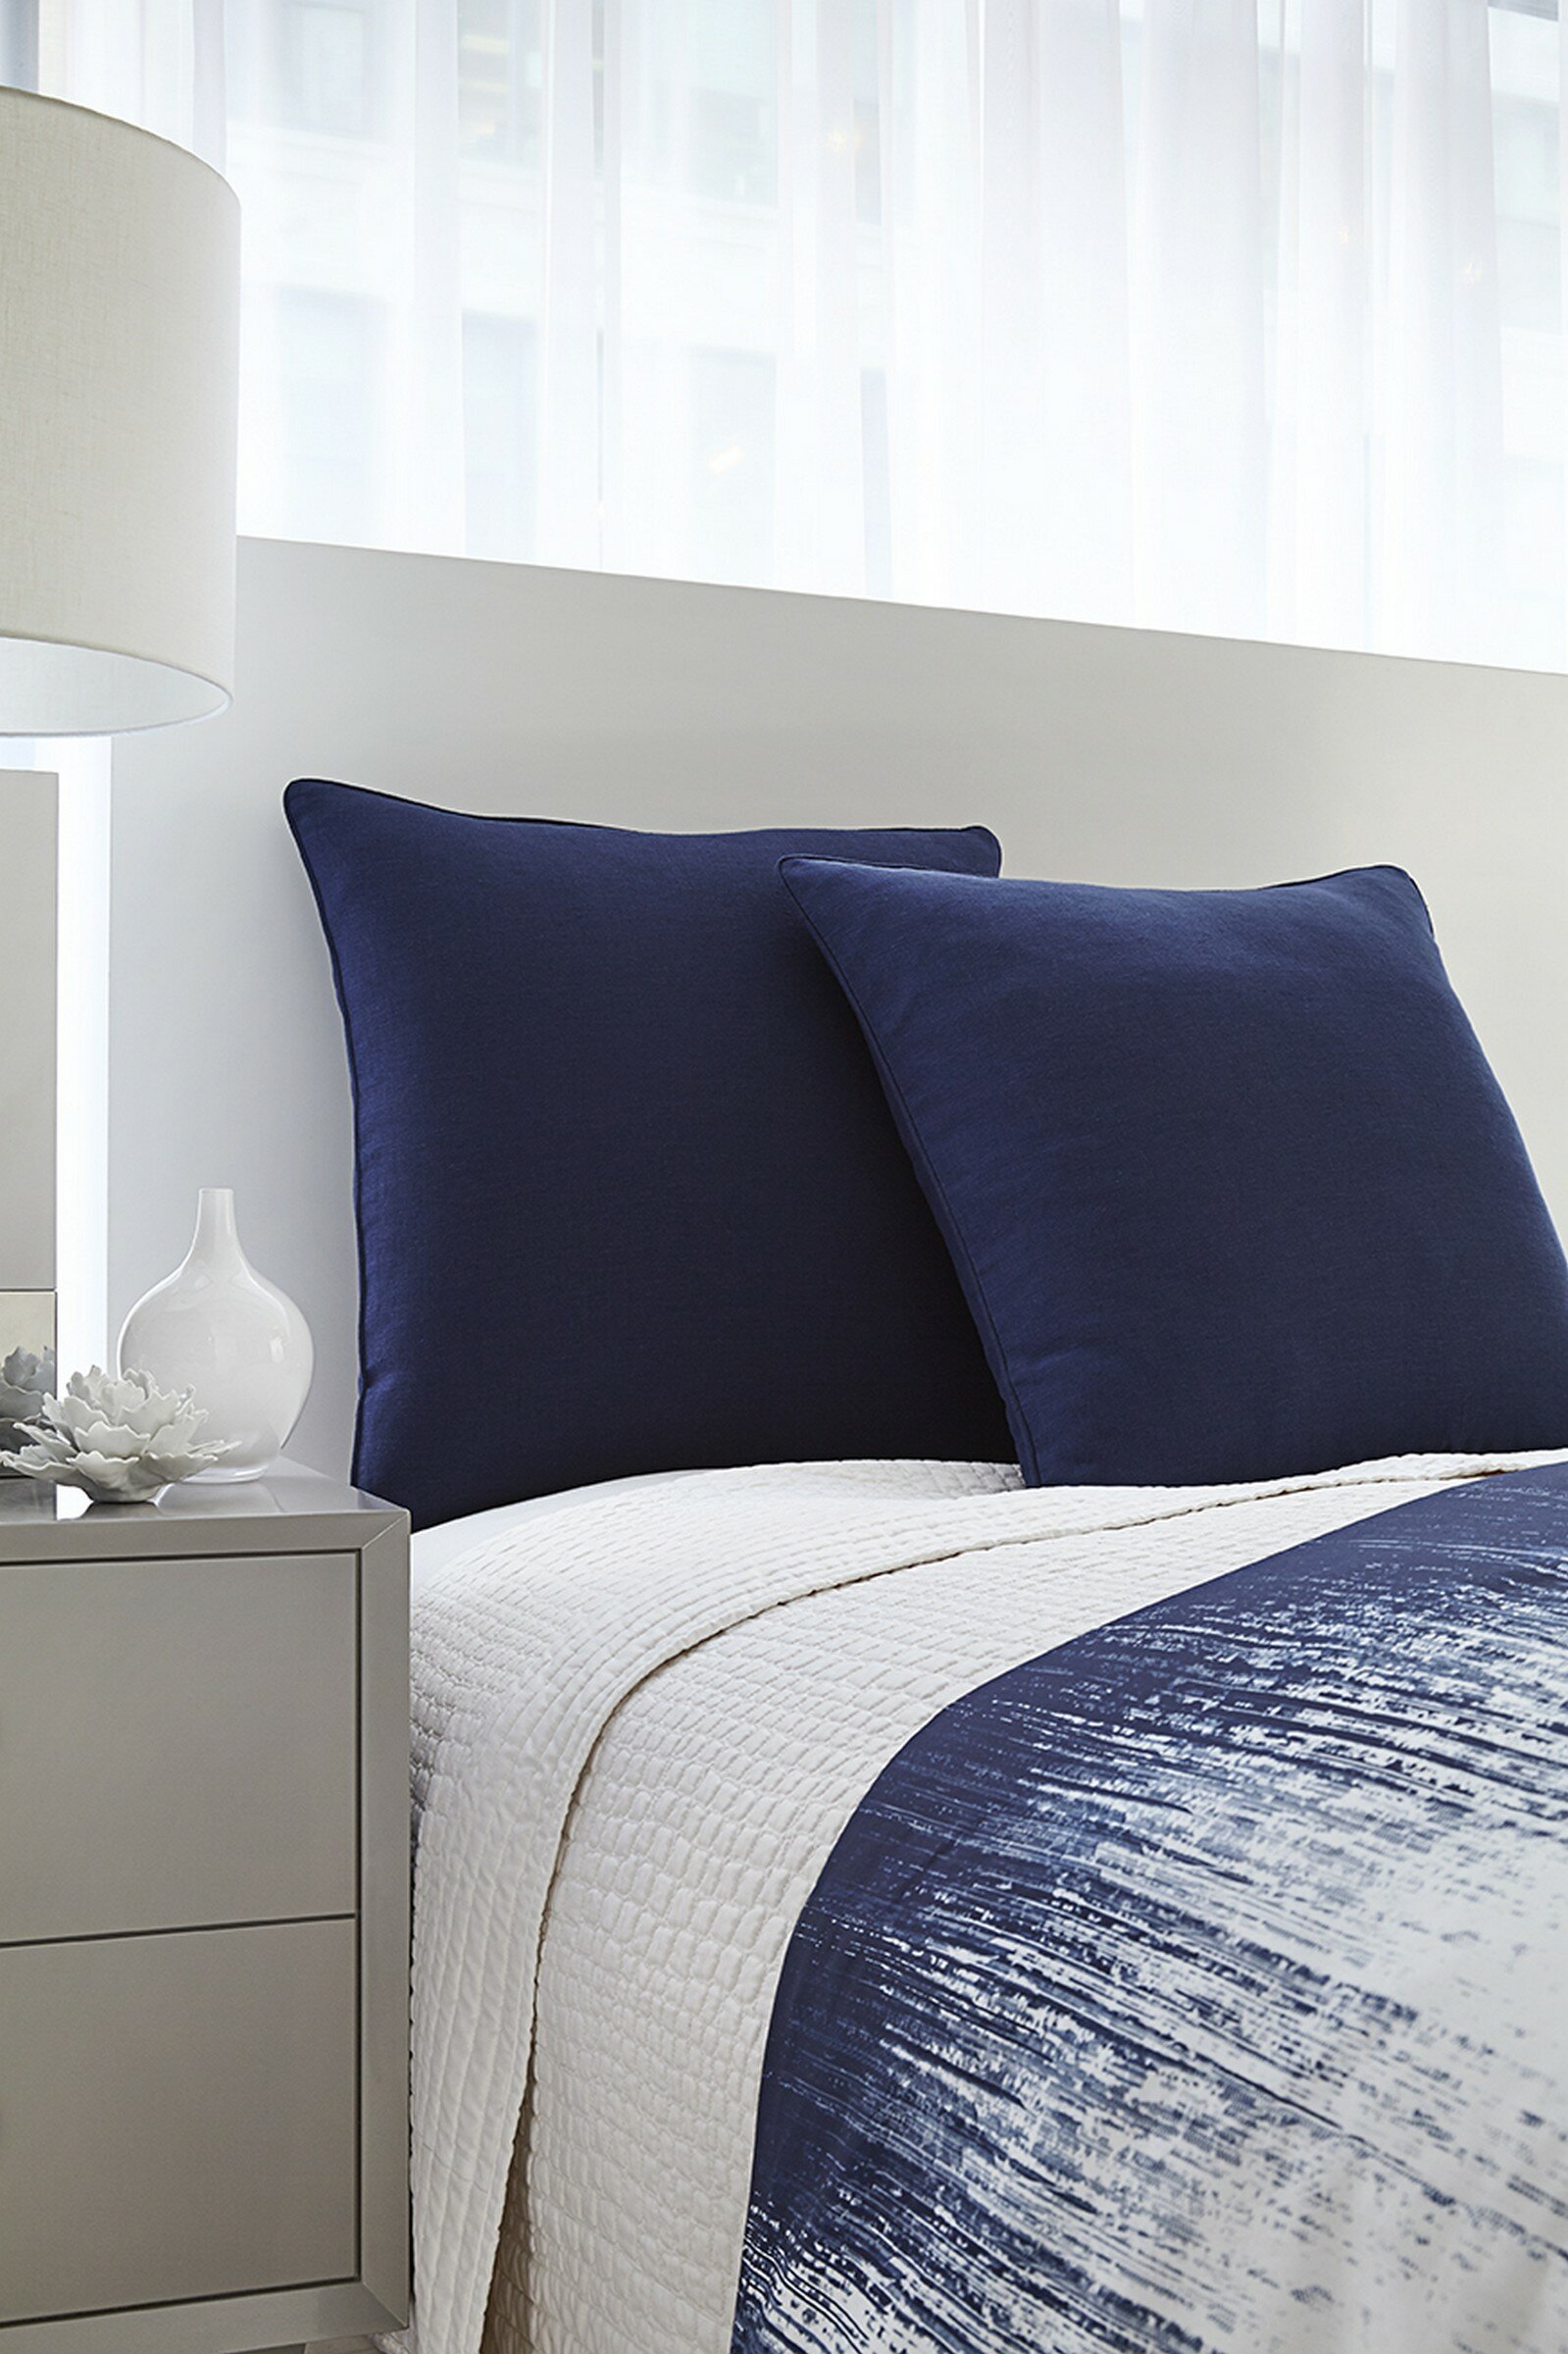 Edgar Square 100% Cotton Pillow Cover AllModern Color: Dark Blue, Fill Material: Polyester/Polyfill, Size: 22'' x 22